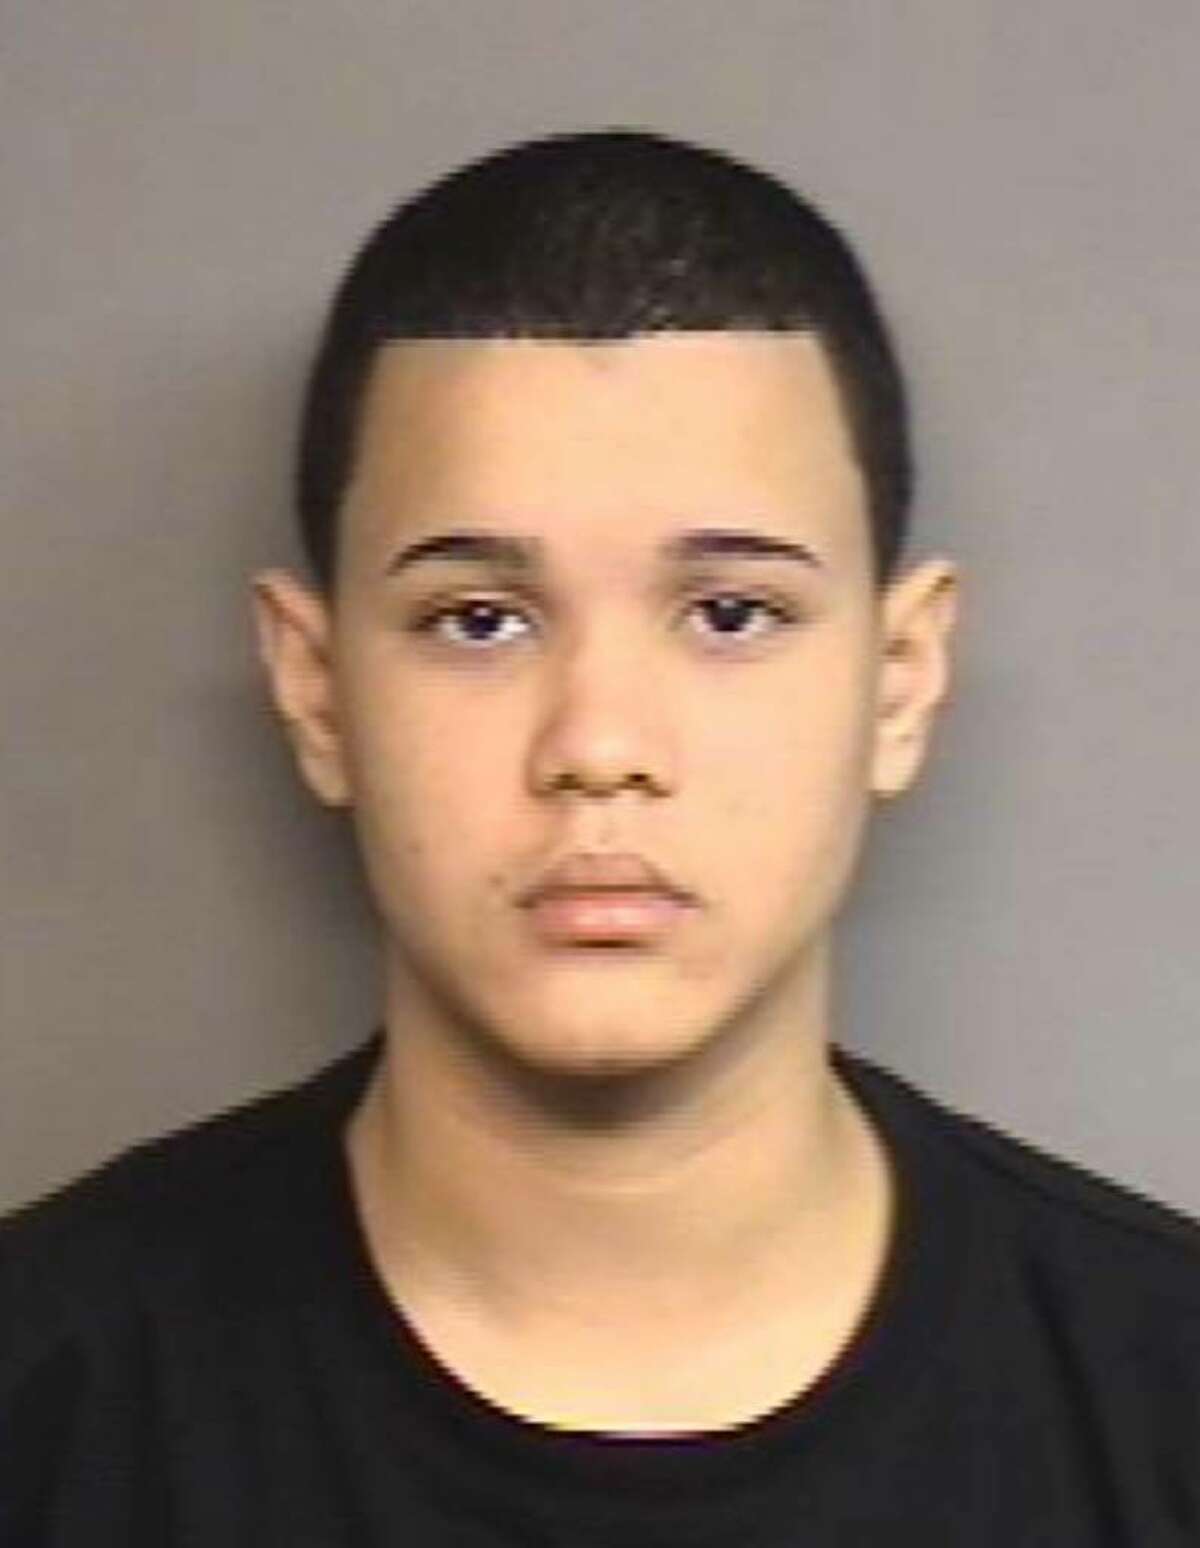 Stamford police photo of Eric Diaz. Eric Diaz, 18, of 106 Crystal St., and Nik Gjuraj, 19, of High View Ave., were arrested recently and each face a long list of felony burglary and larceny charges, said Sgt. Peter diSpagna, commander of the property crimes unit at the Stamford Police Department. The arrests were a result of a police investigation based on anonymous tips and accounts from neighborhood residents, diSpagna said. The hunting rifles were reported stolen during the morning of Nov. 18 when the homeowner's son heard noises in his garage and saw a burglar flee from his